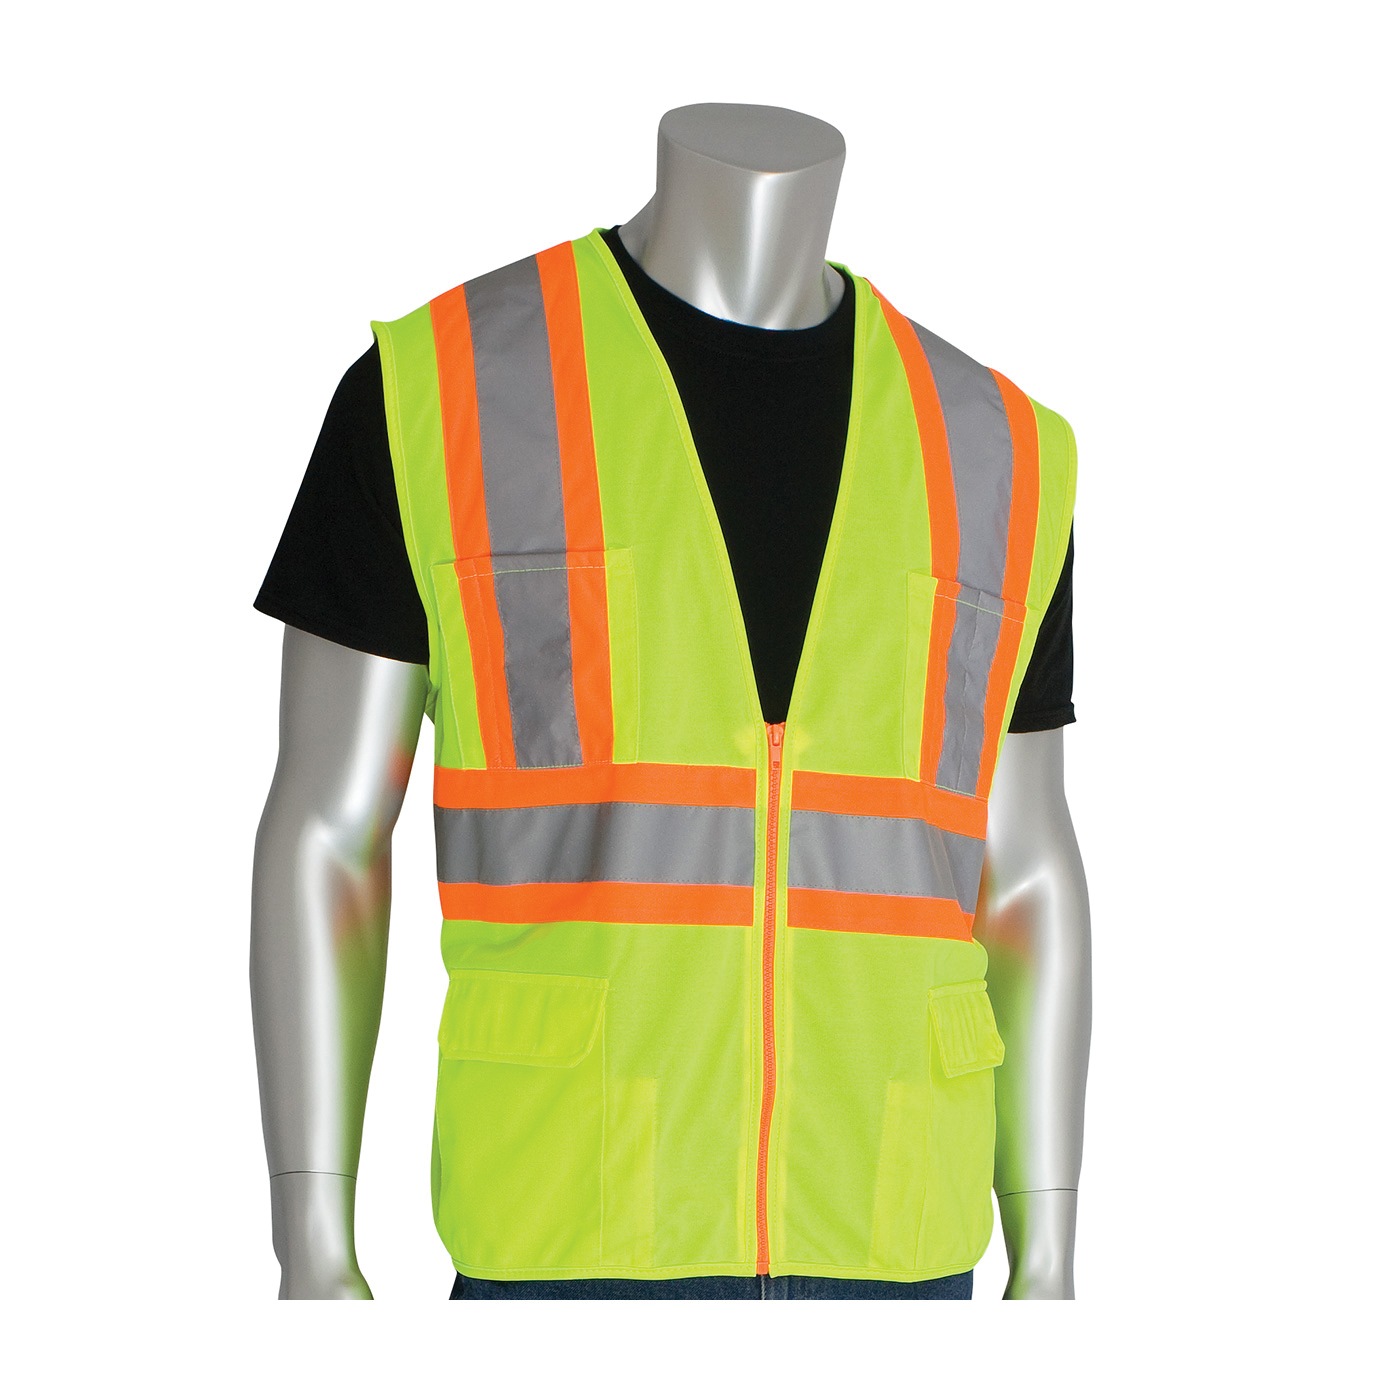 PIP® 302-MAPLY-S 2-Tone Premium Surveyor Safety Vest, S, Hi-Viz Lime Yellow, Polyester, Zipper Closure, 11 Pockets, ANSI Class: Class 2, Specifications Met: ANSI 107 Type R